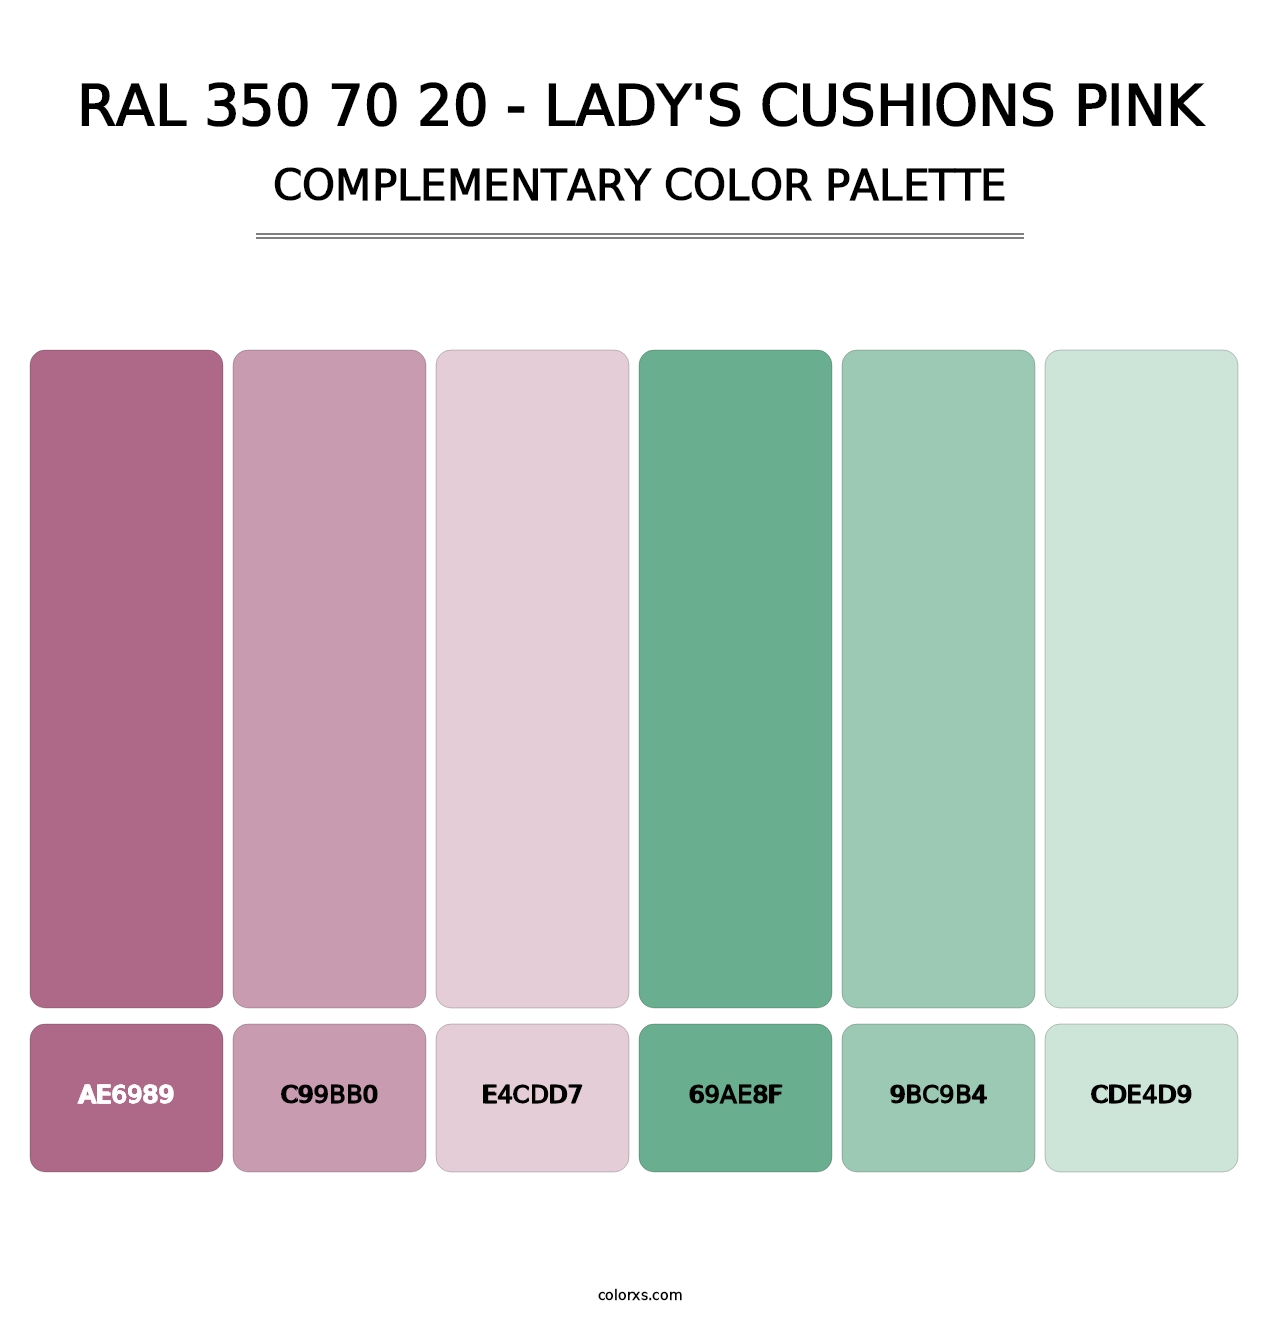 RAL 350 70 20 - Lady's Cushions Pink - Complementary Color Palette